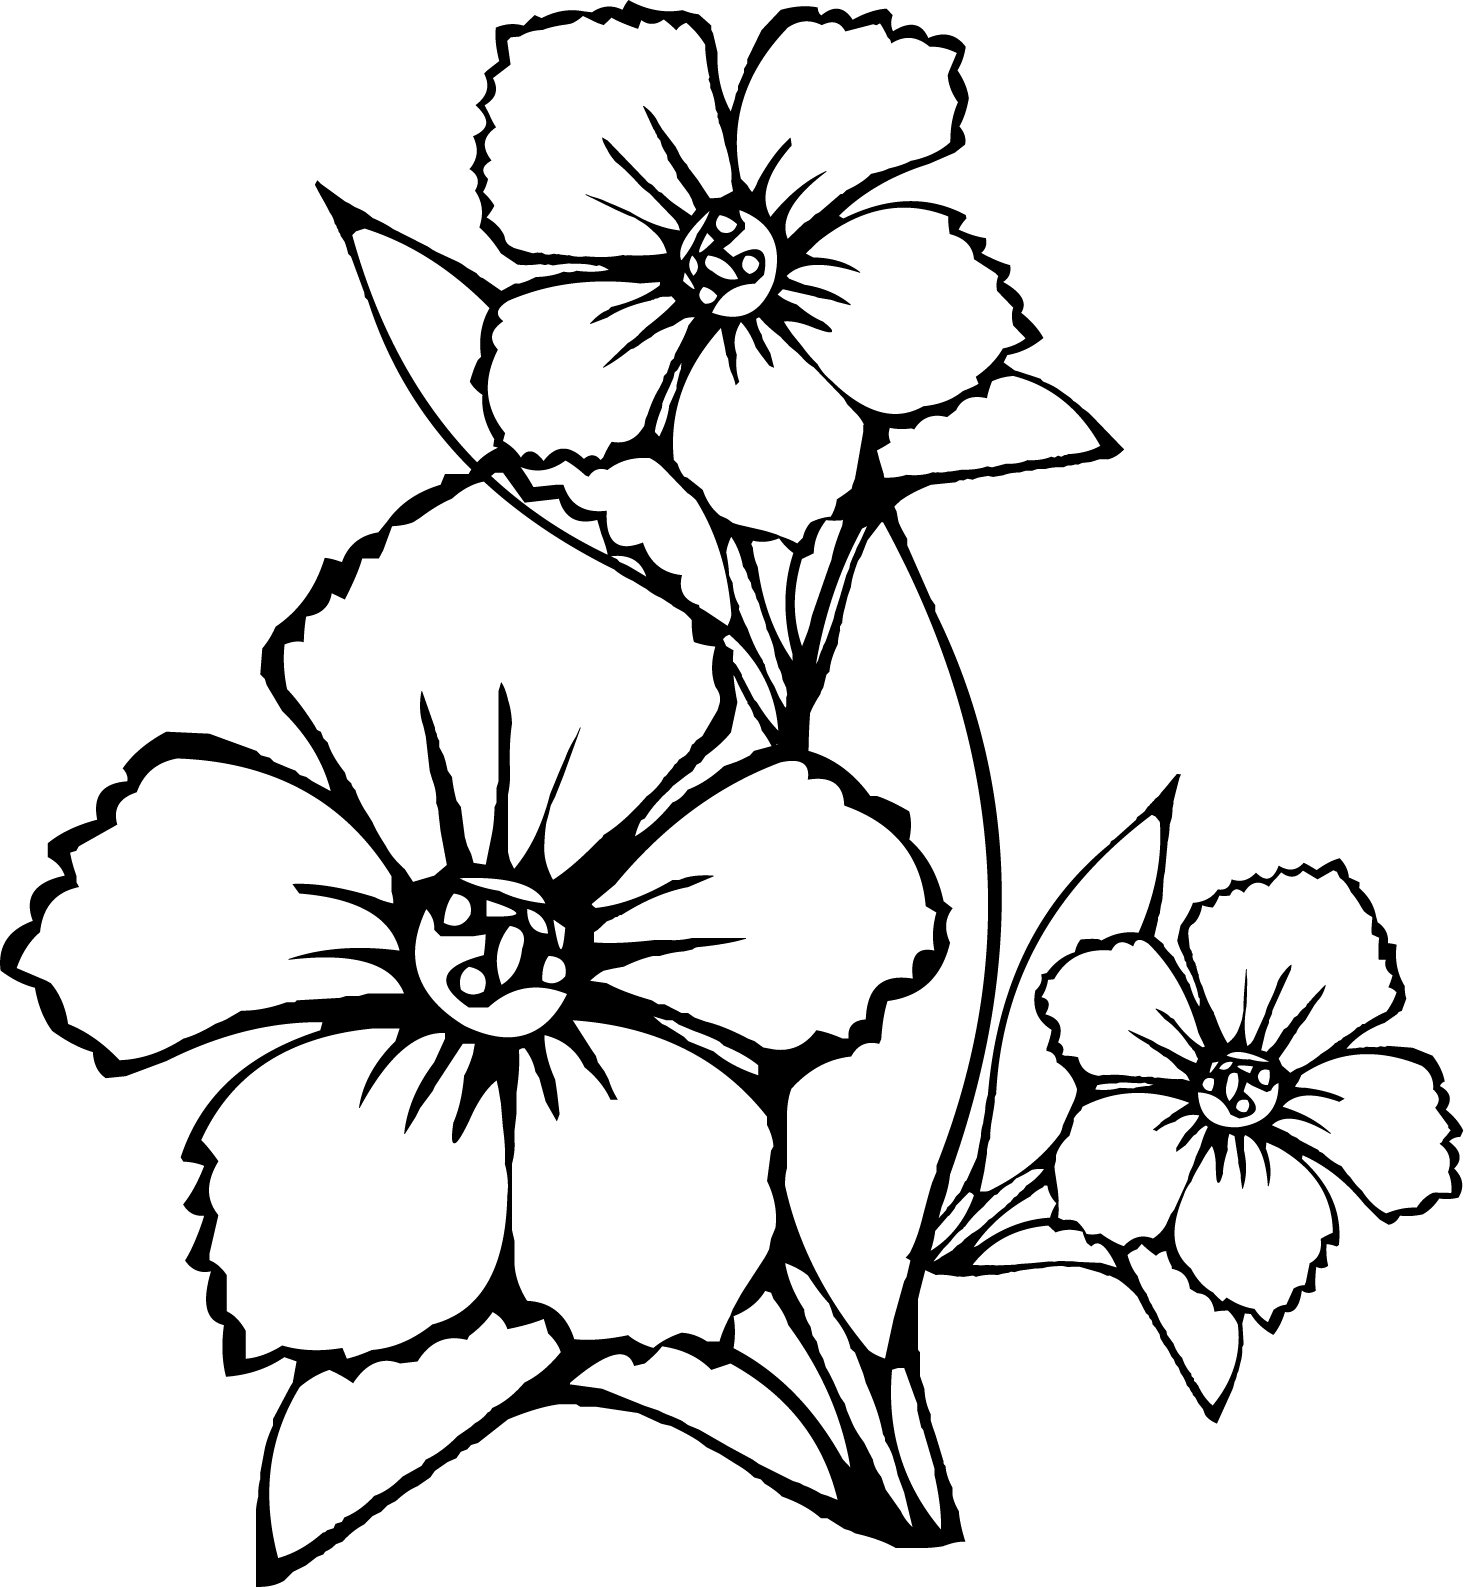 flower coloring pages, free coloring print pages, geometric ...